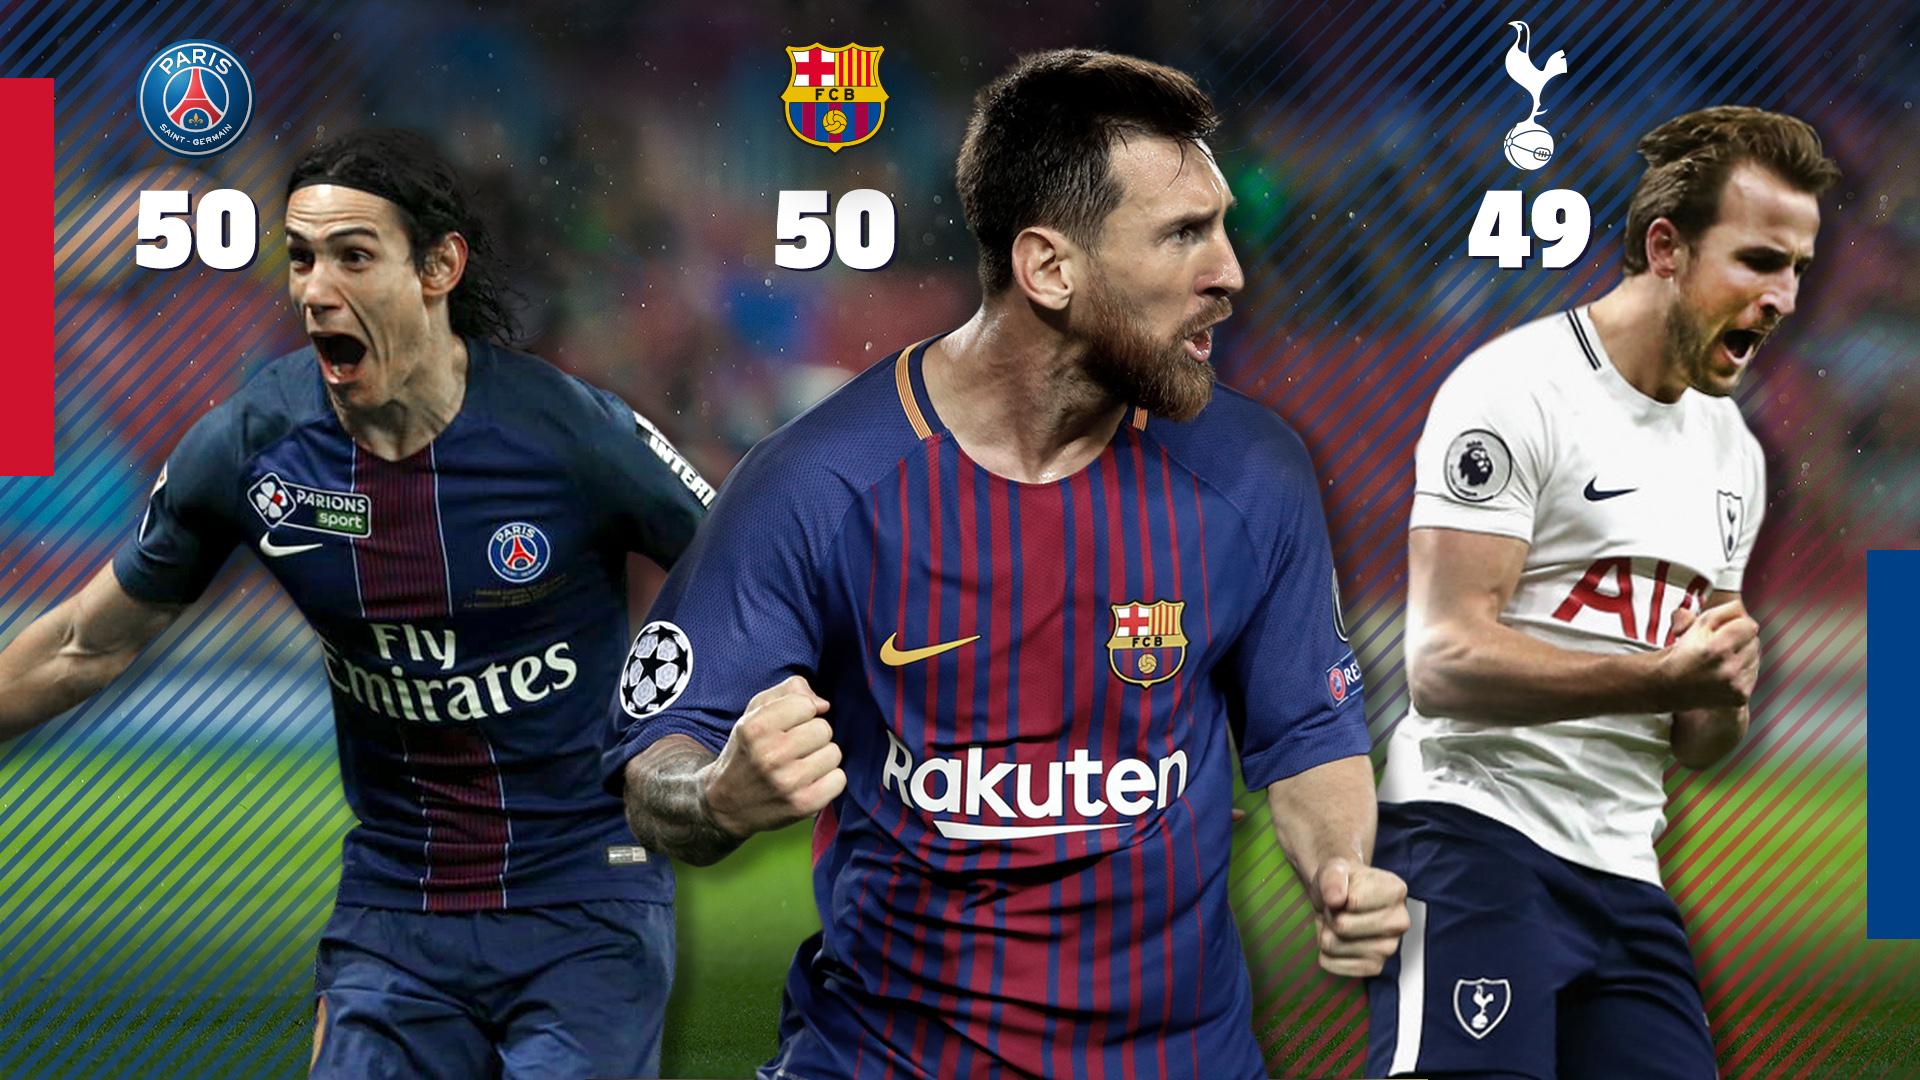 Messi closes 2017 top club scorer all competitions the big five European leagues